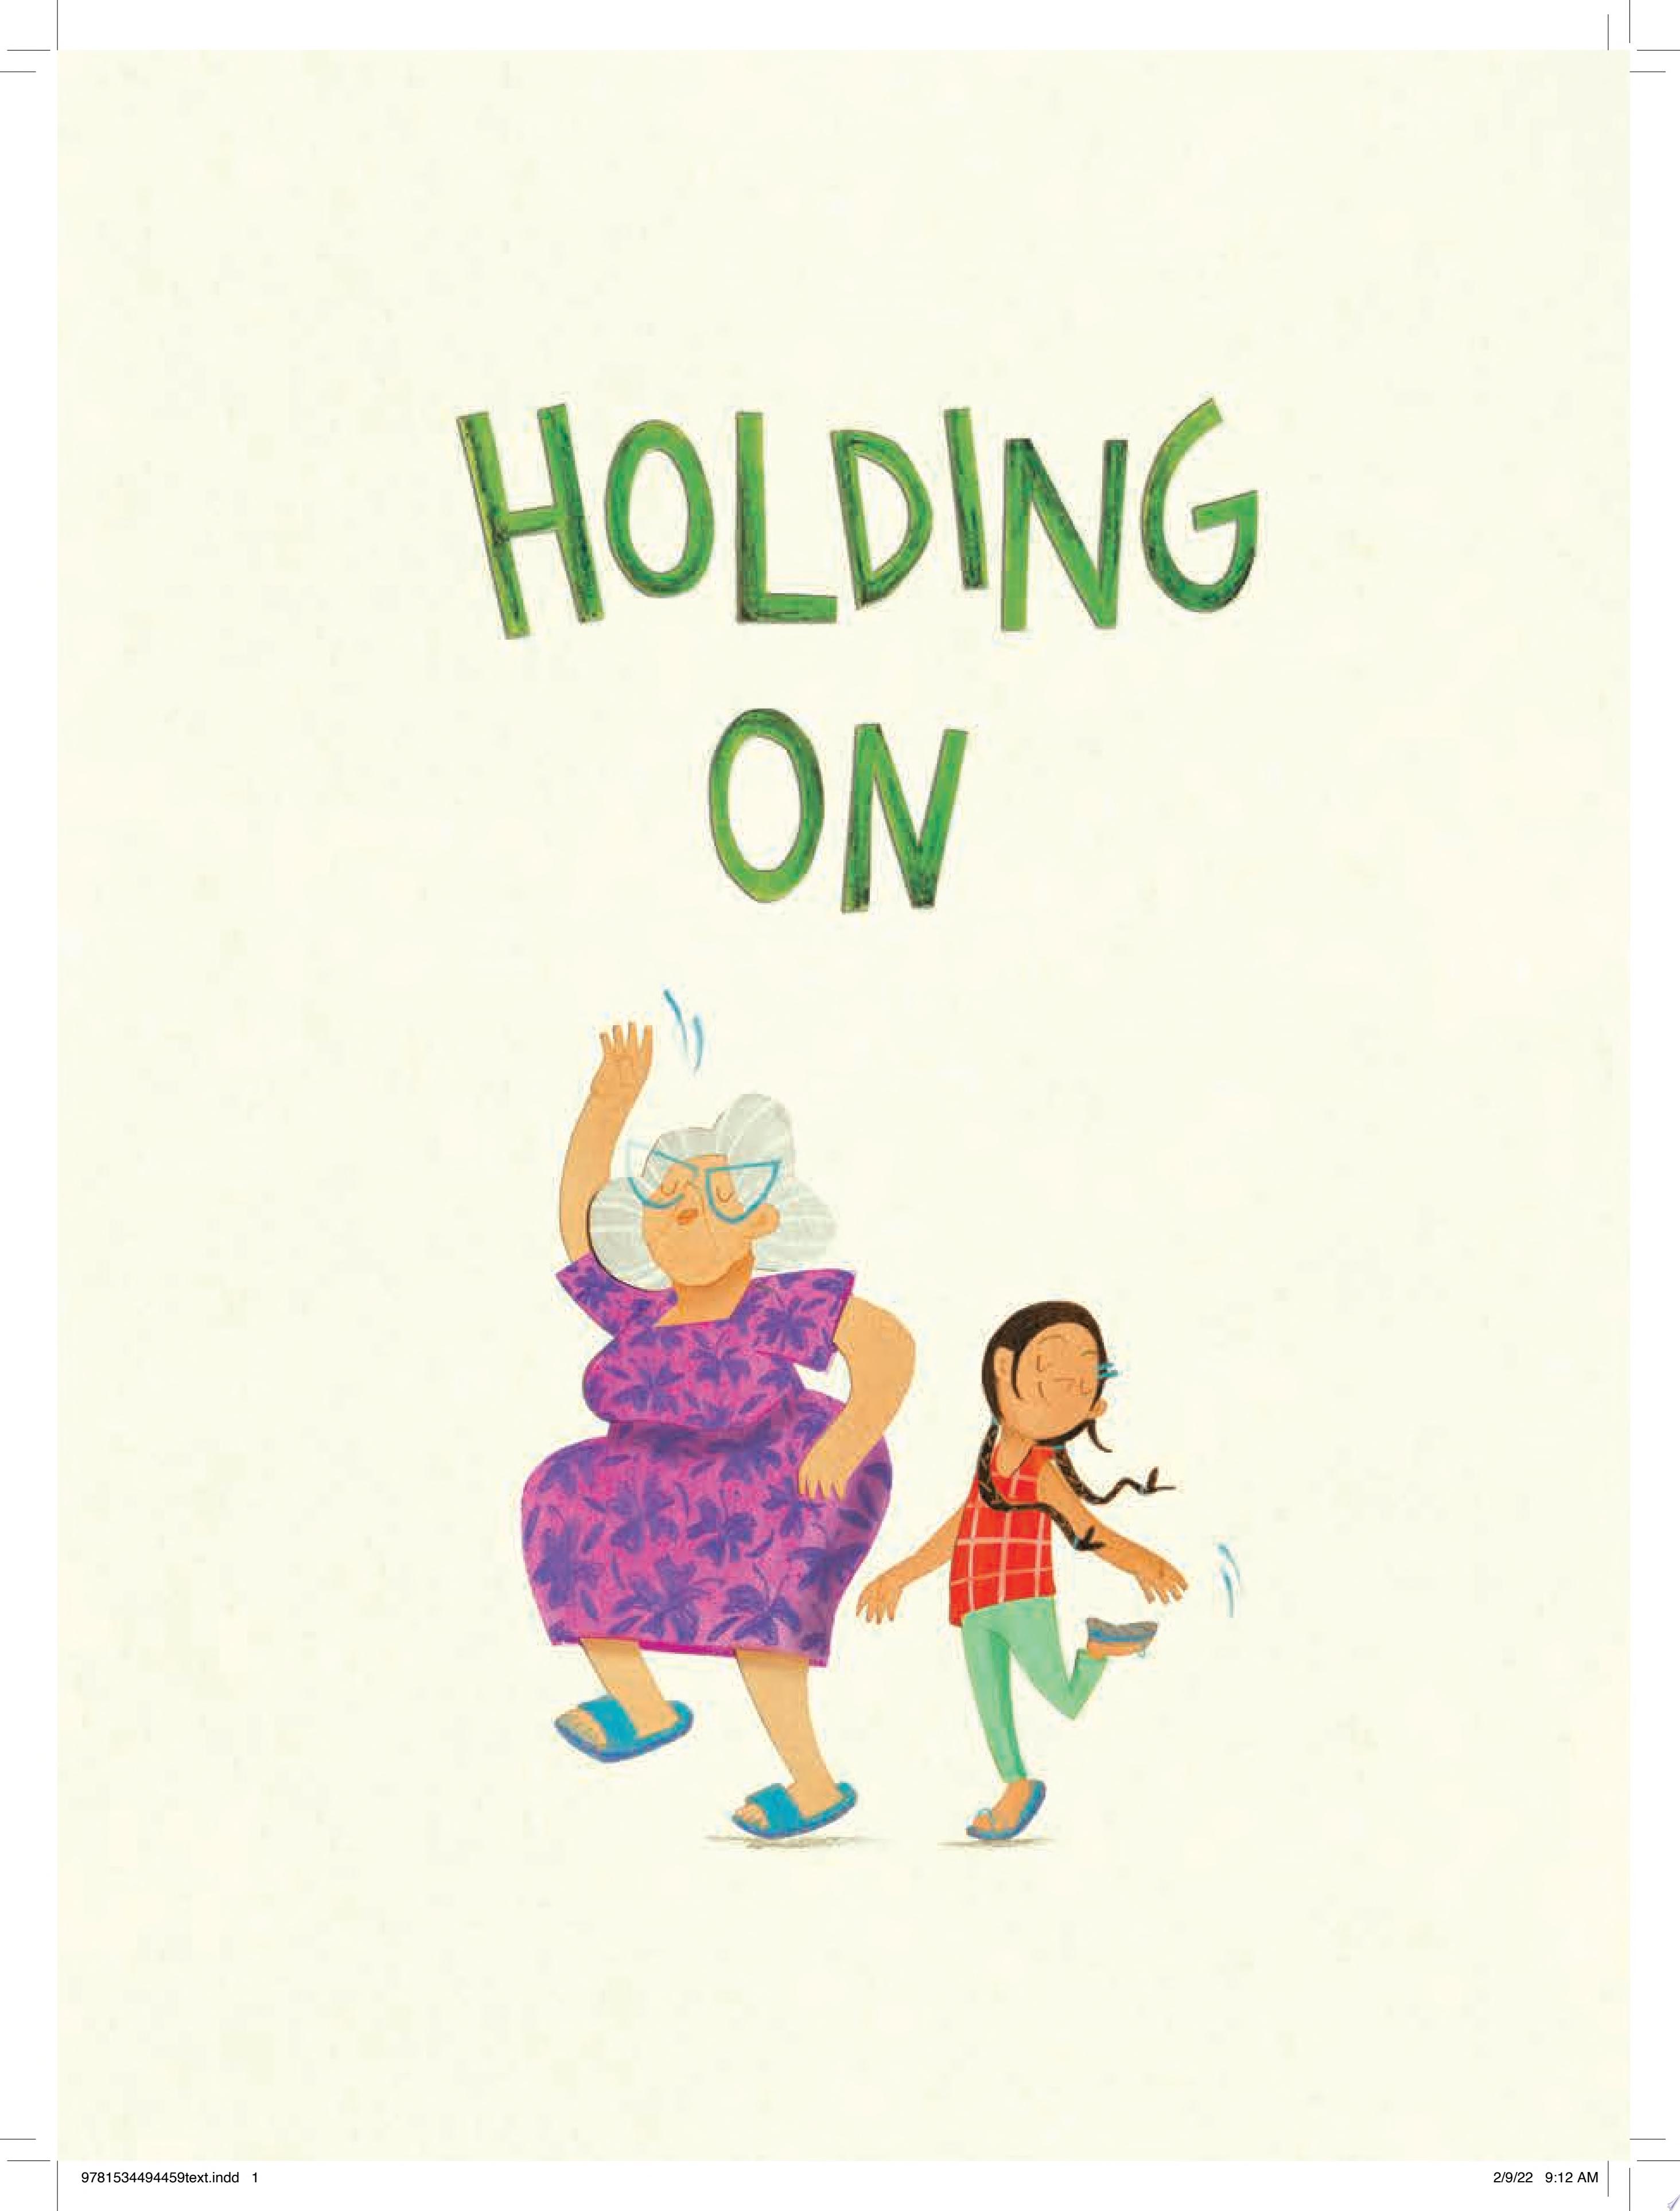 Image for "Holding On"